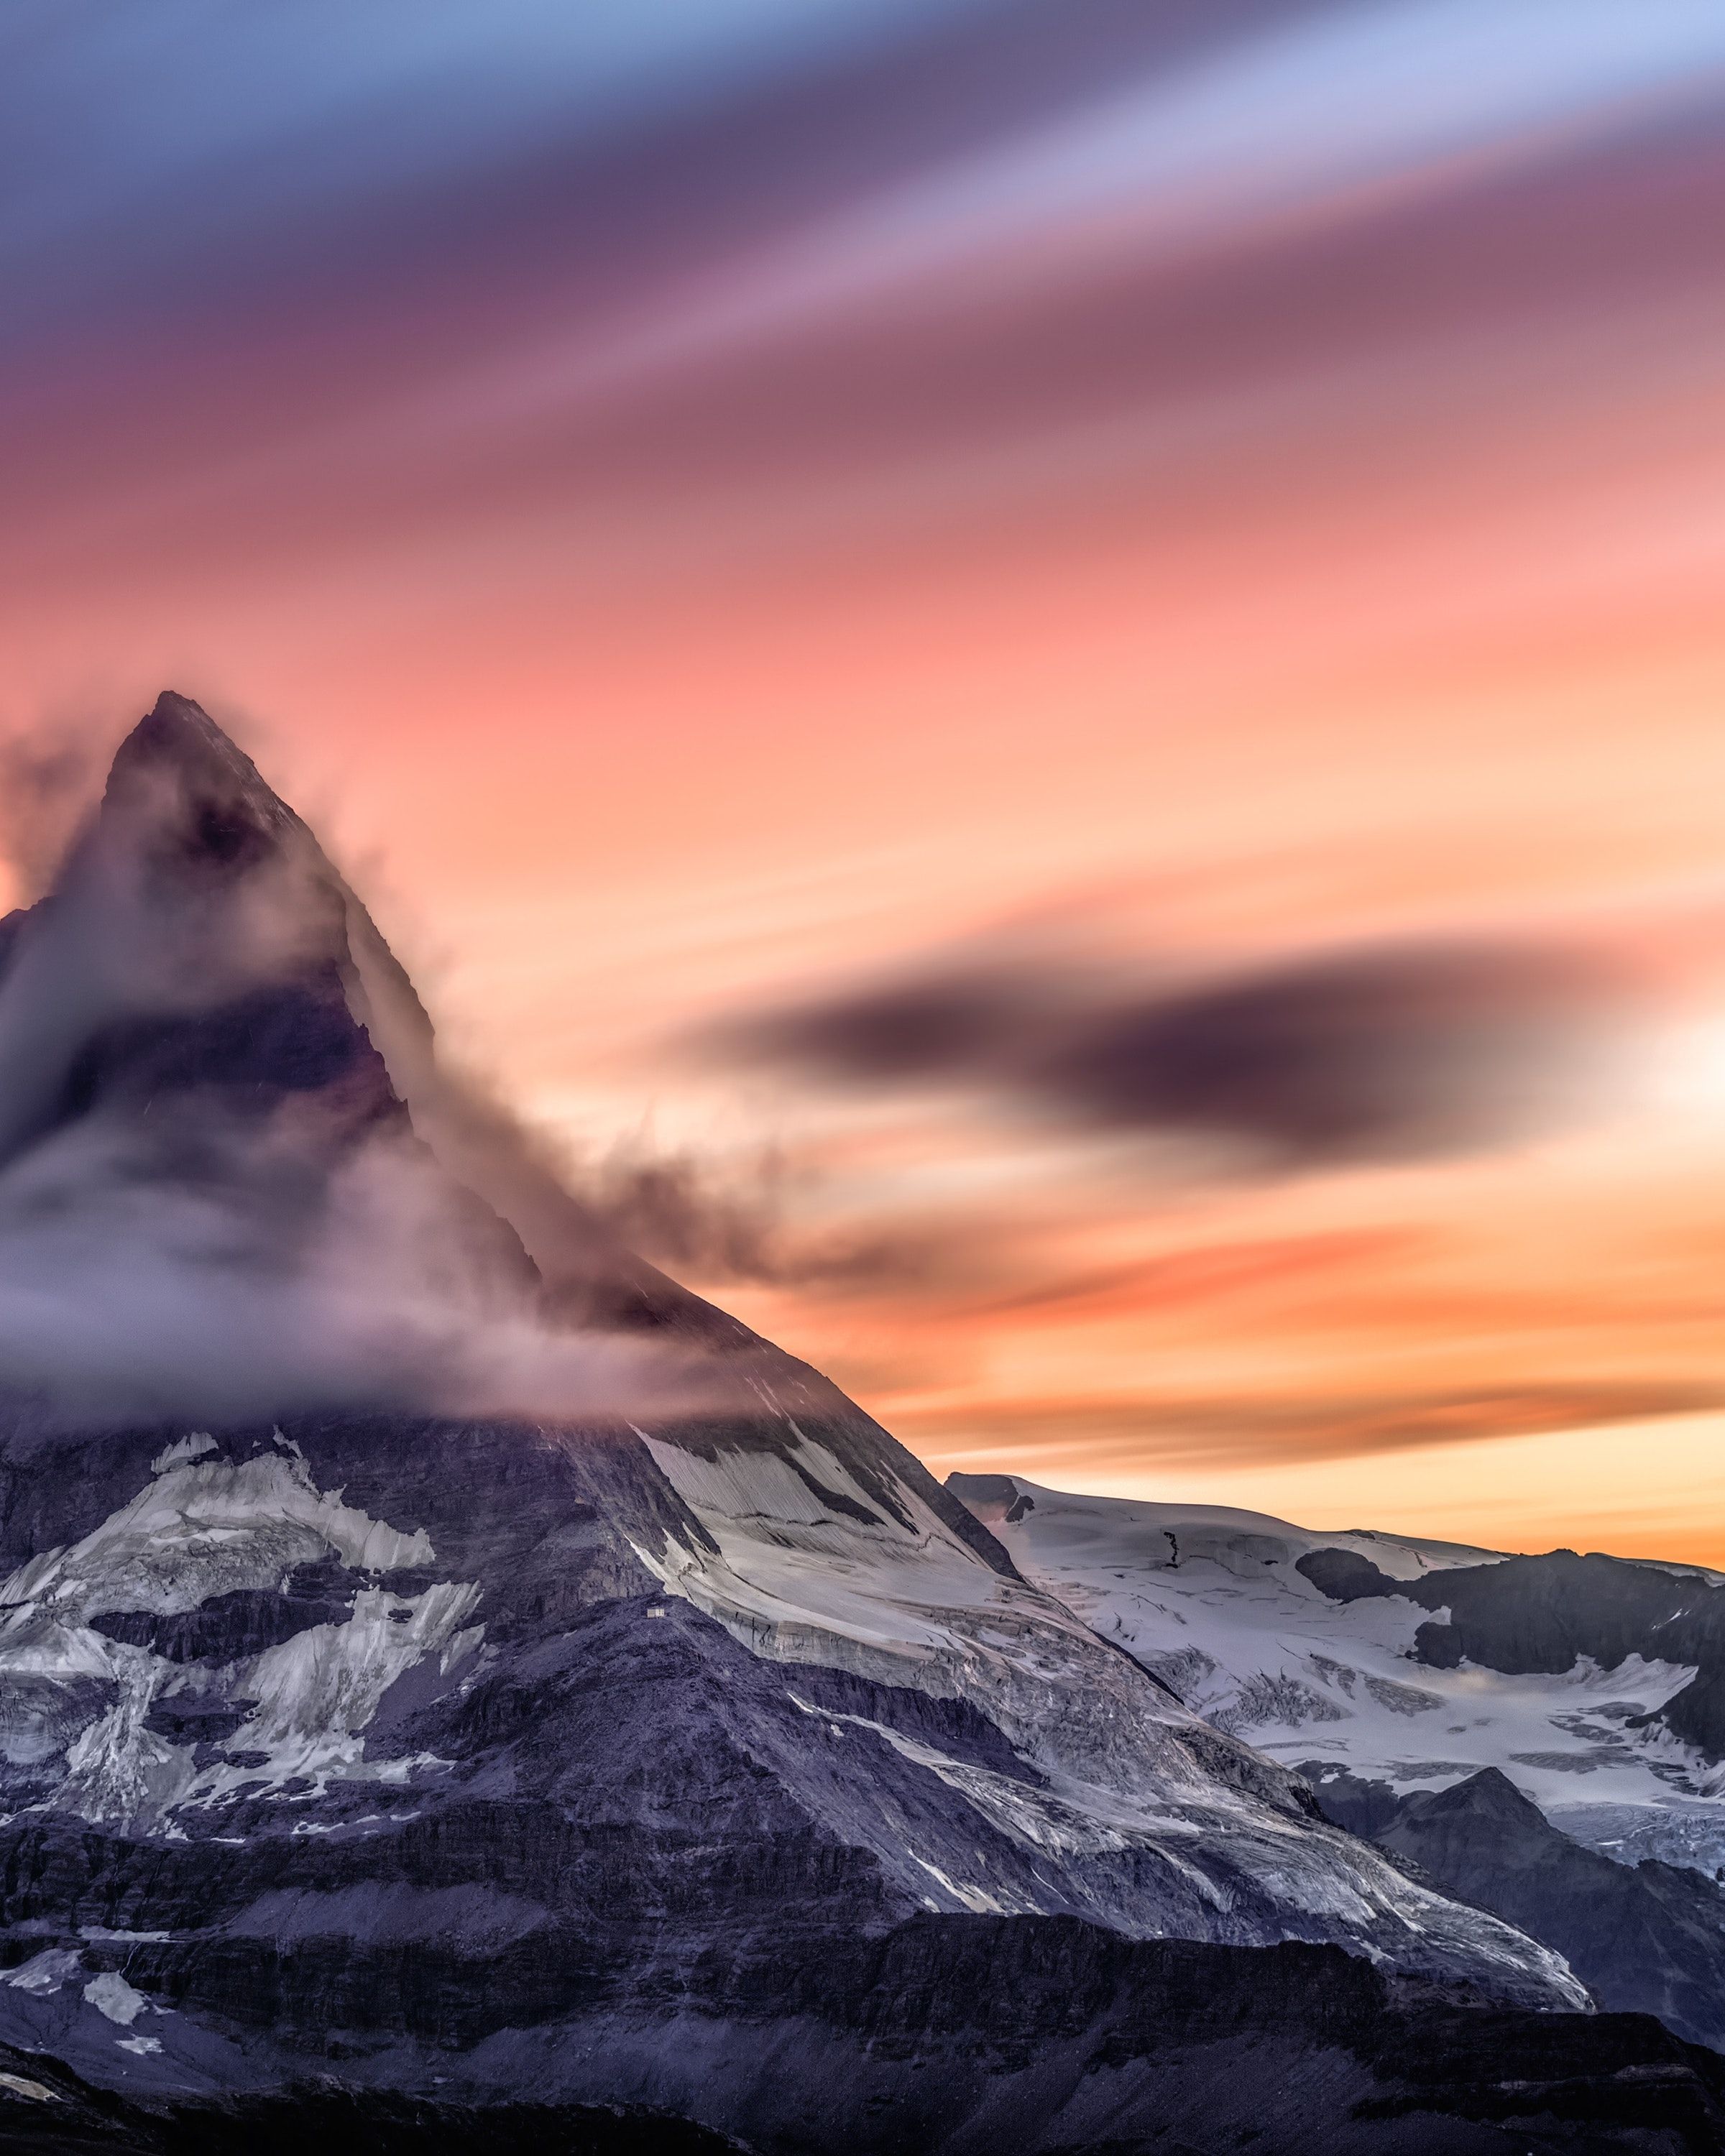 Misc #cloud #mountain #sky #sunset #peak #wallpaper HD 4k background for android :). Cool background, 4k background, Background